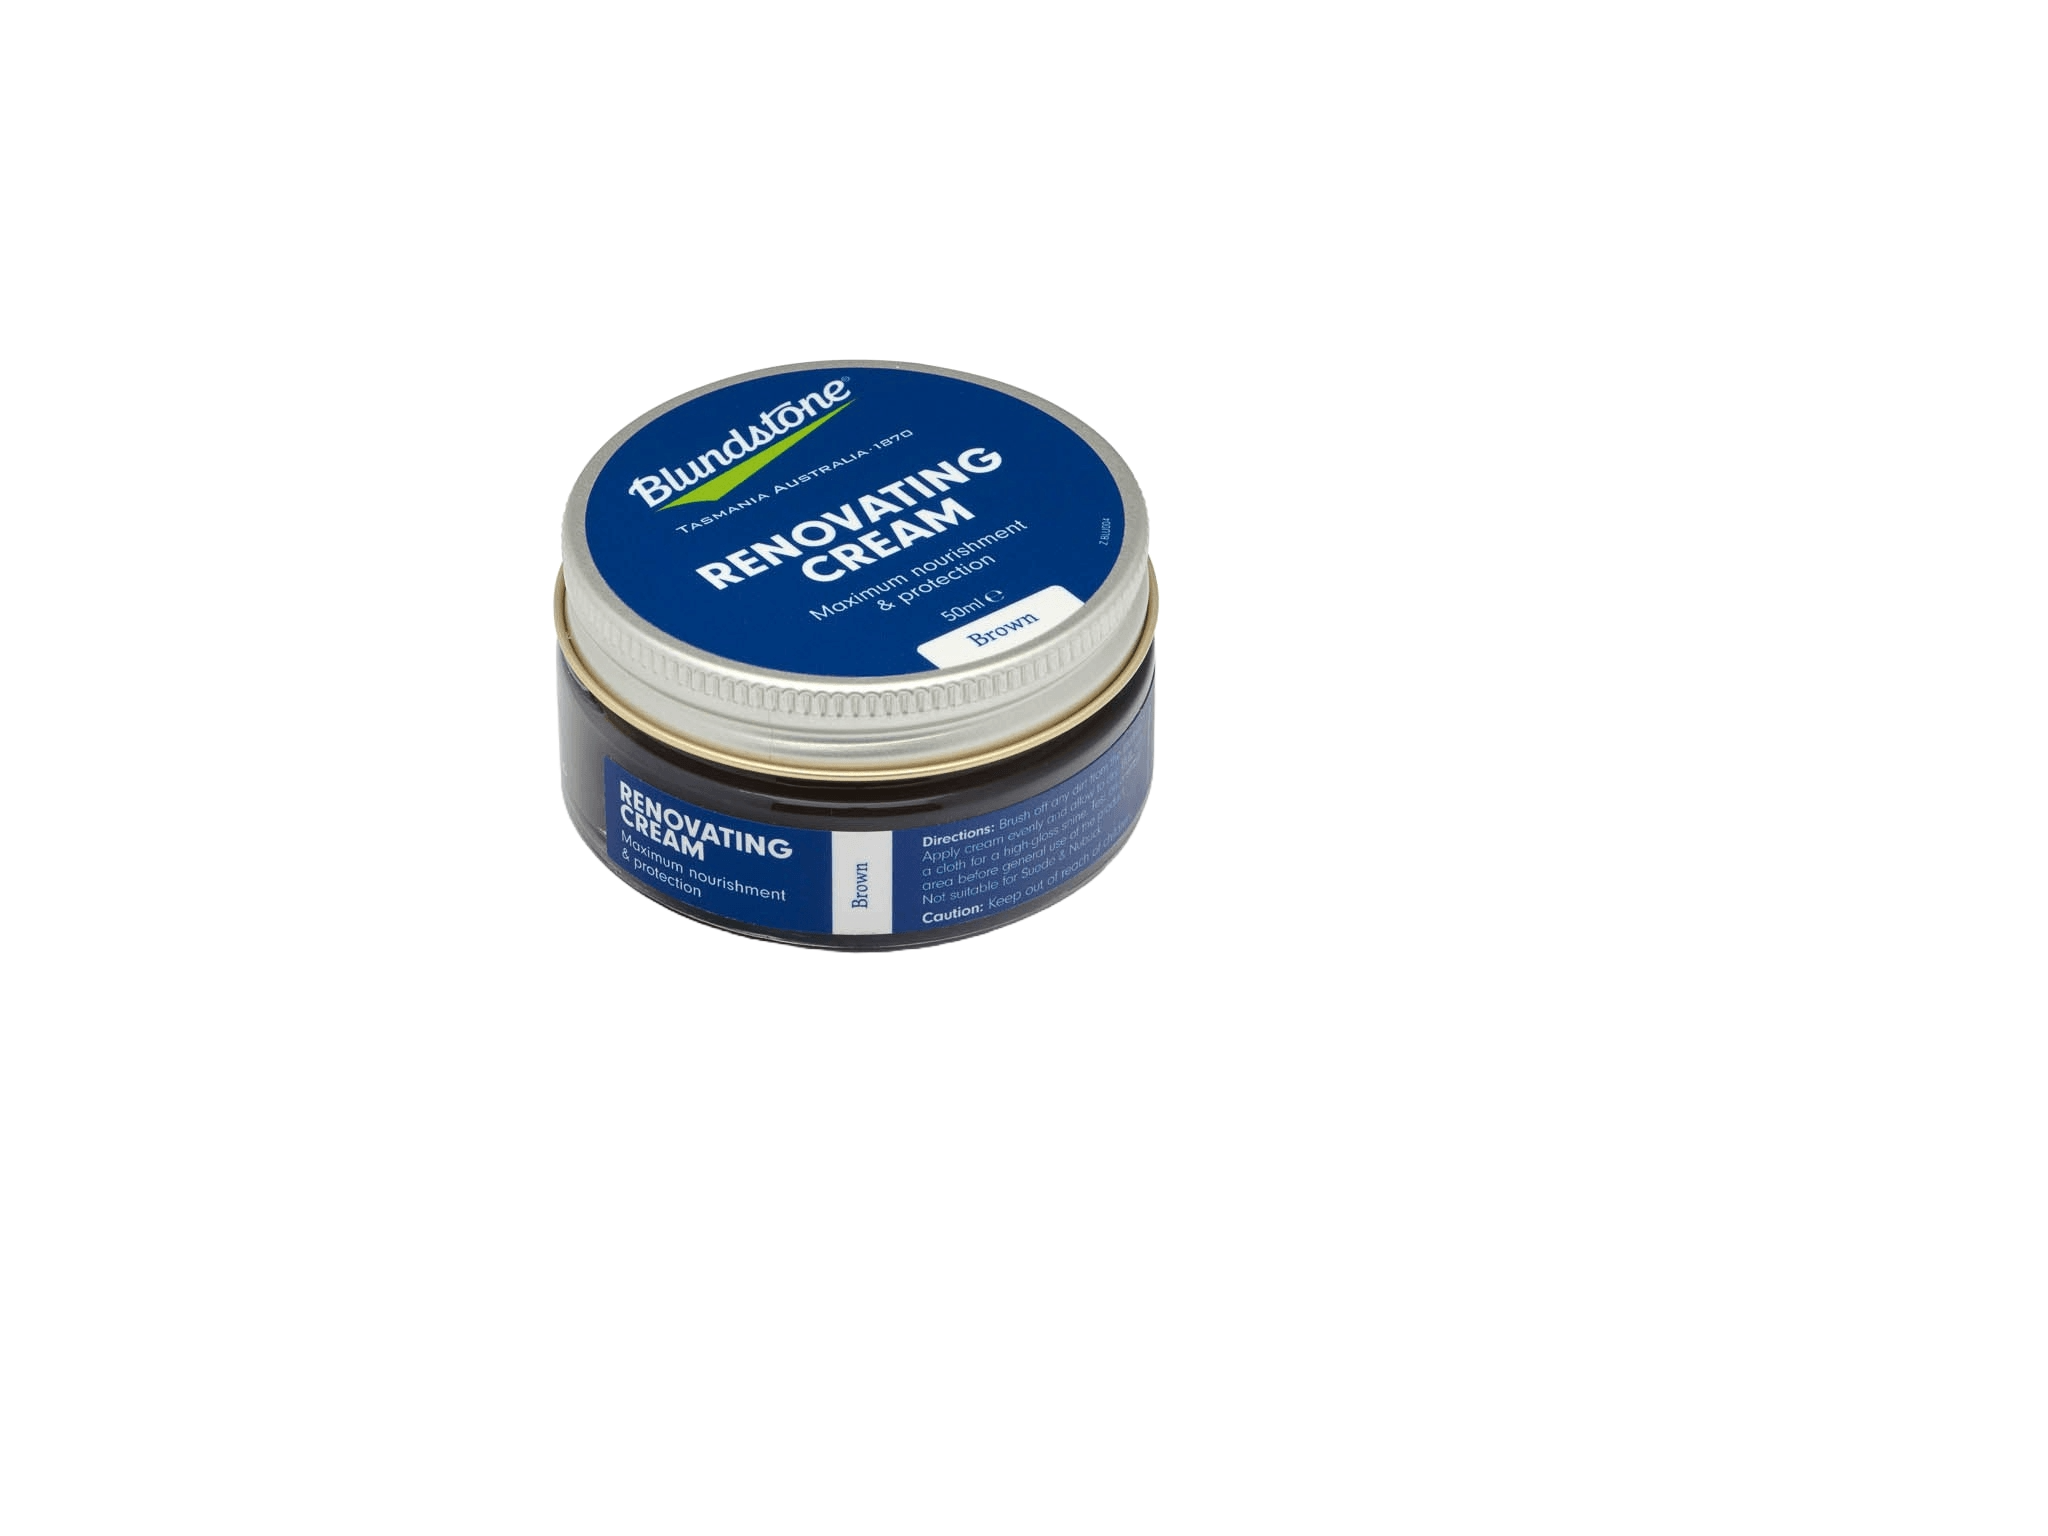 Our Rustic Renovating Cream is a neutral-color cream that is suitable for  use on full grain or flat leather styles, including Rustic Brown, Rustic  Black and Antique Brown. Since this cream is non-pigmented, it can be used  on any Blundstone leather boot.